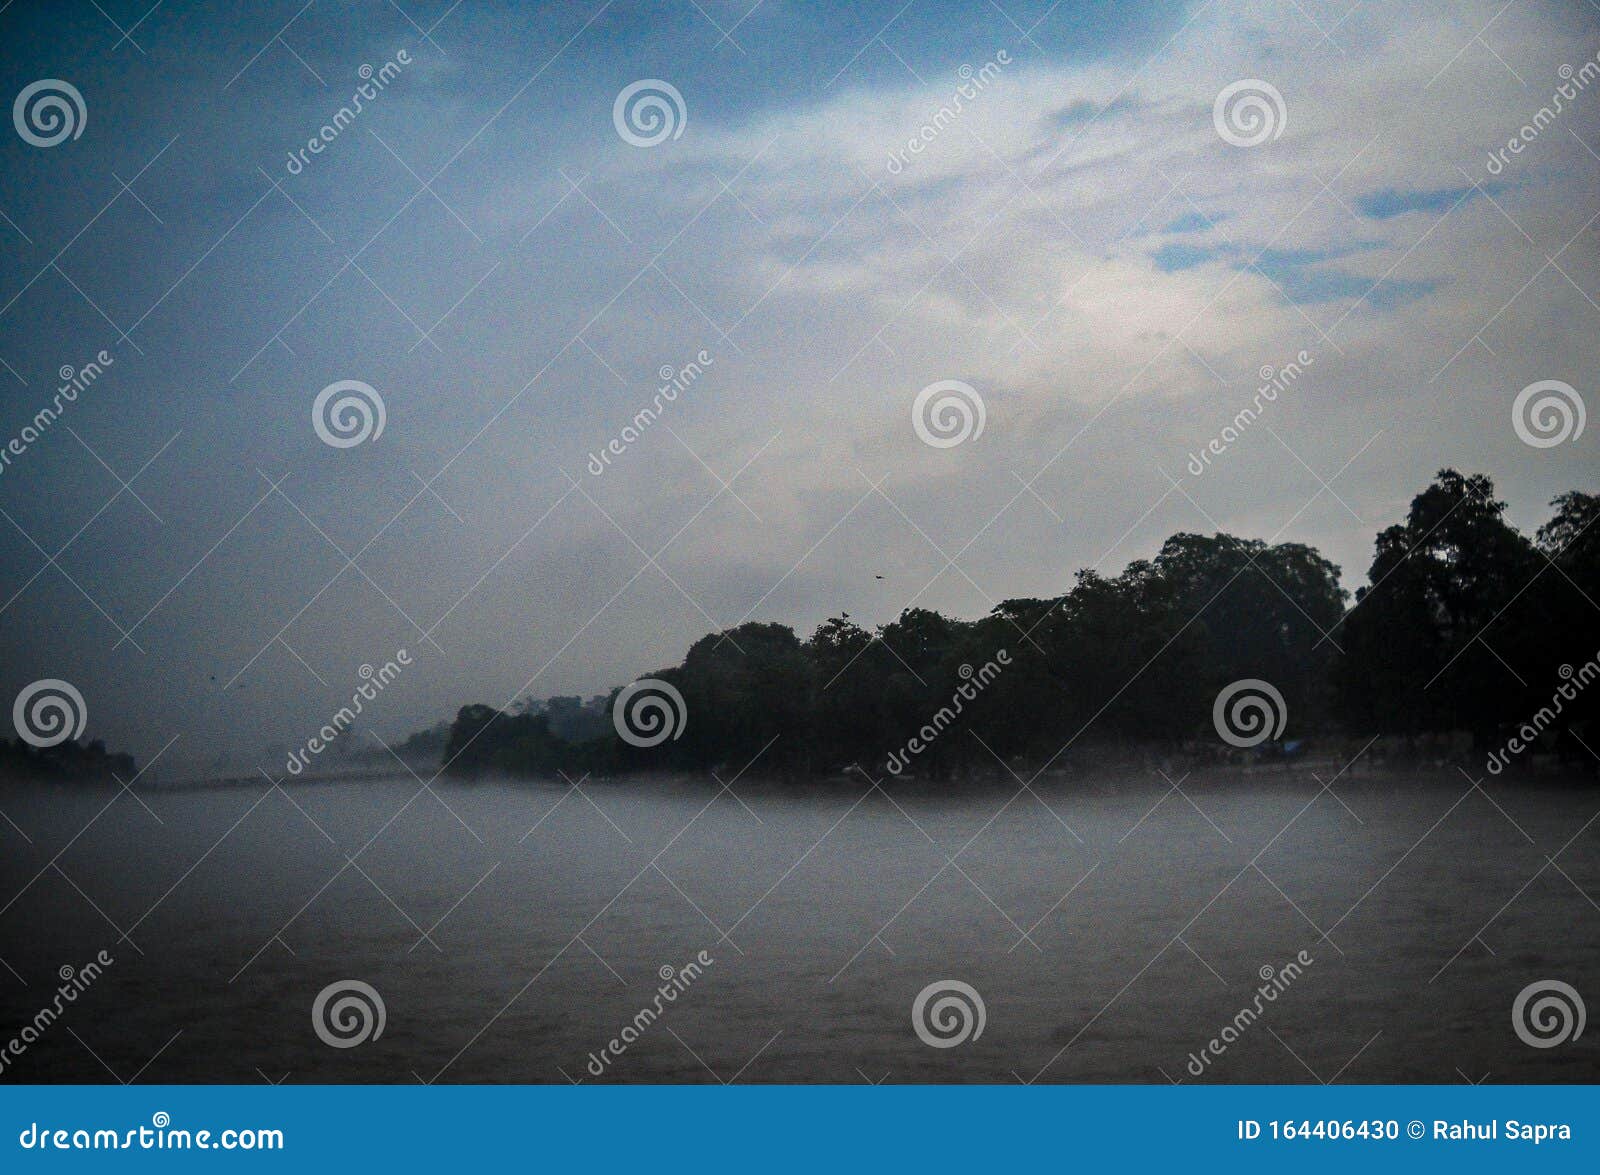 clouds over the ganga river in haridwar india. ganga river view with clouds